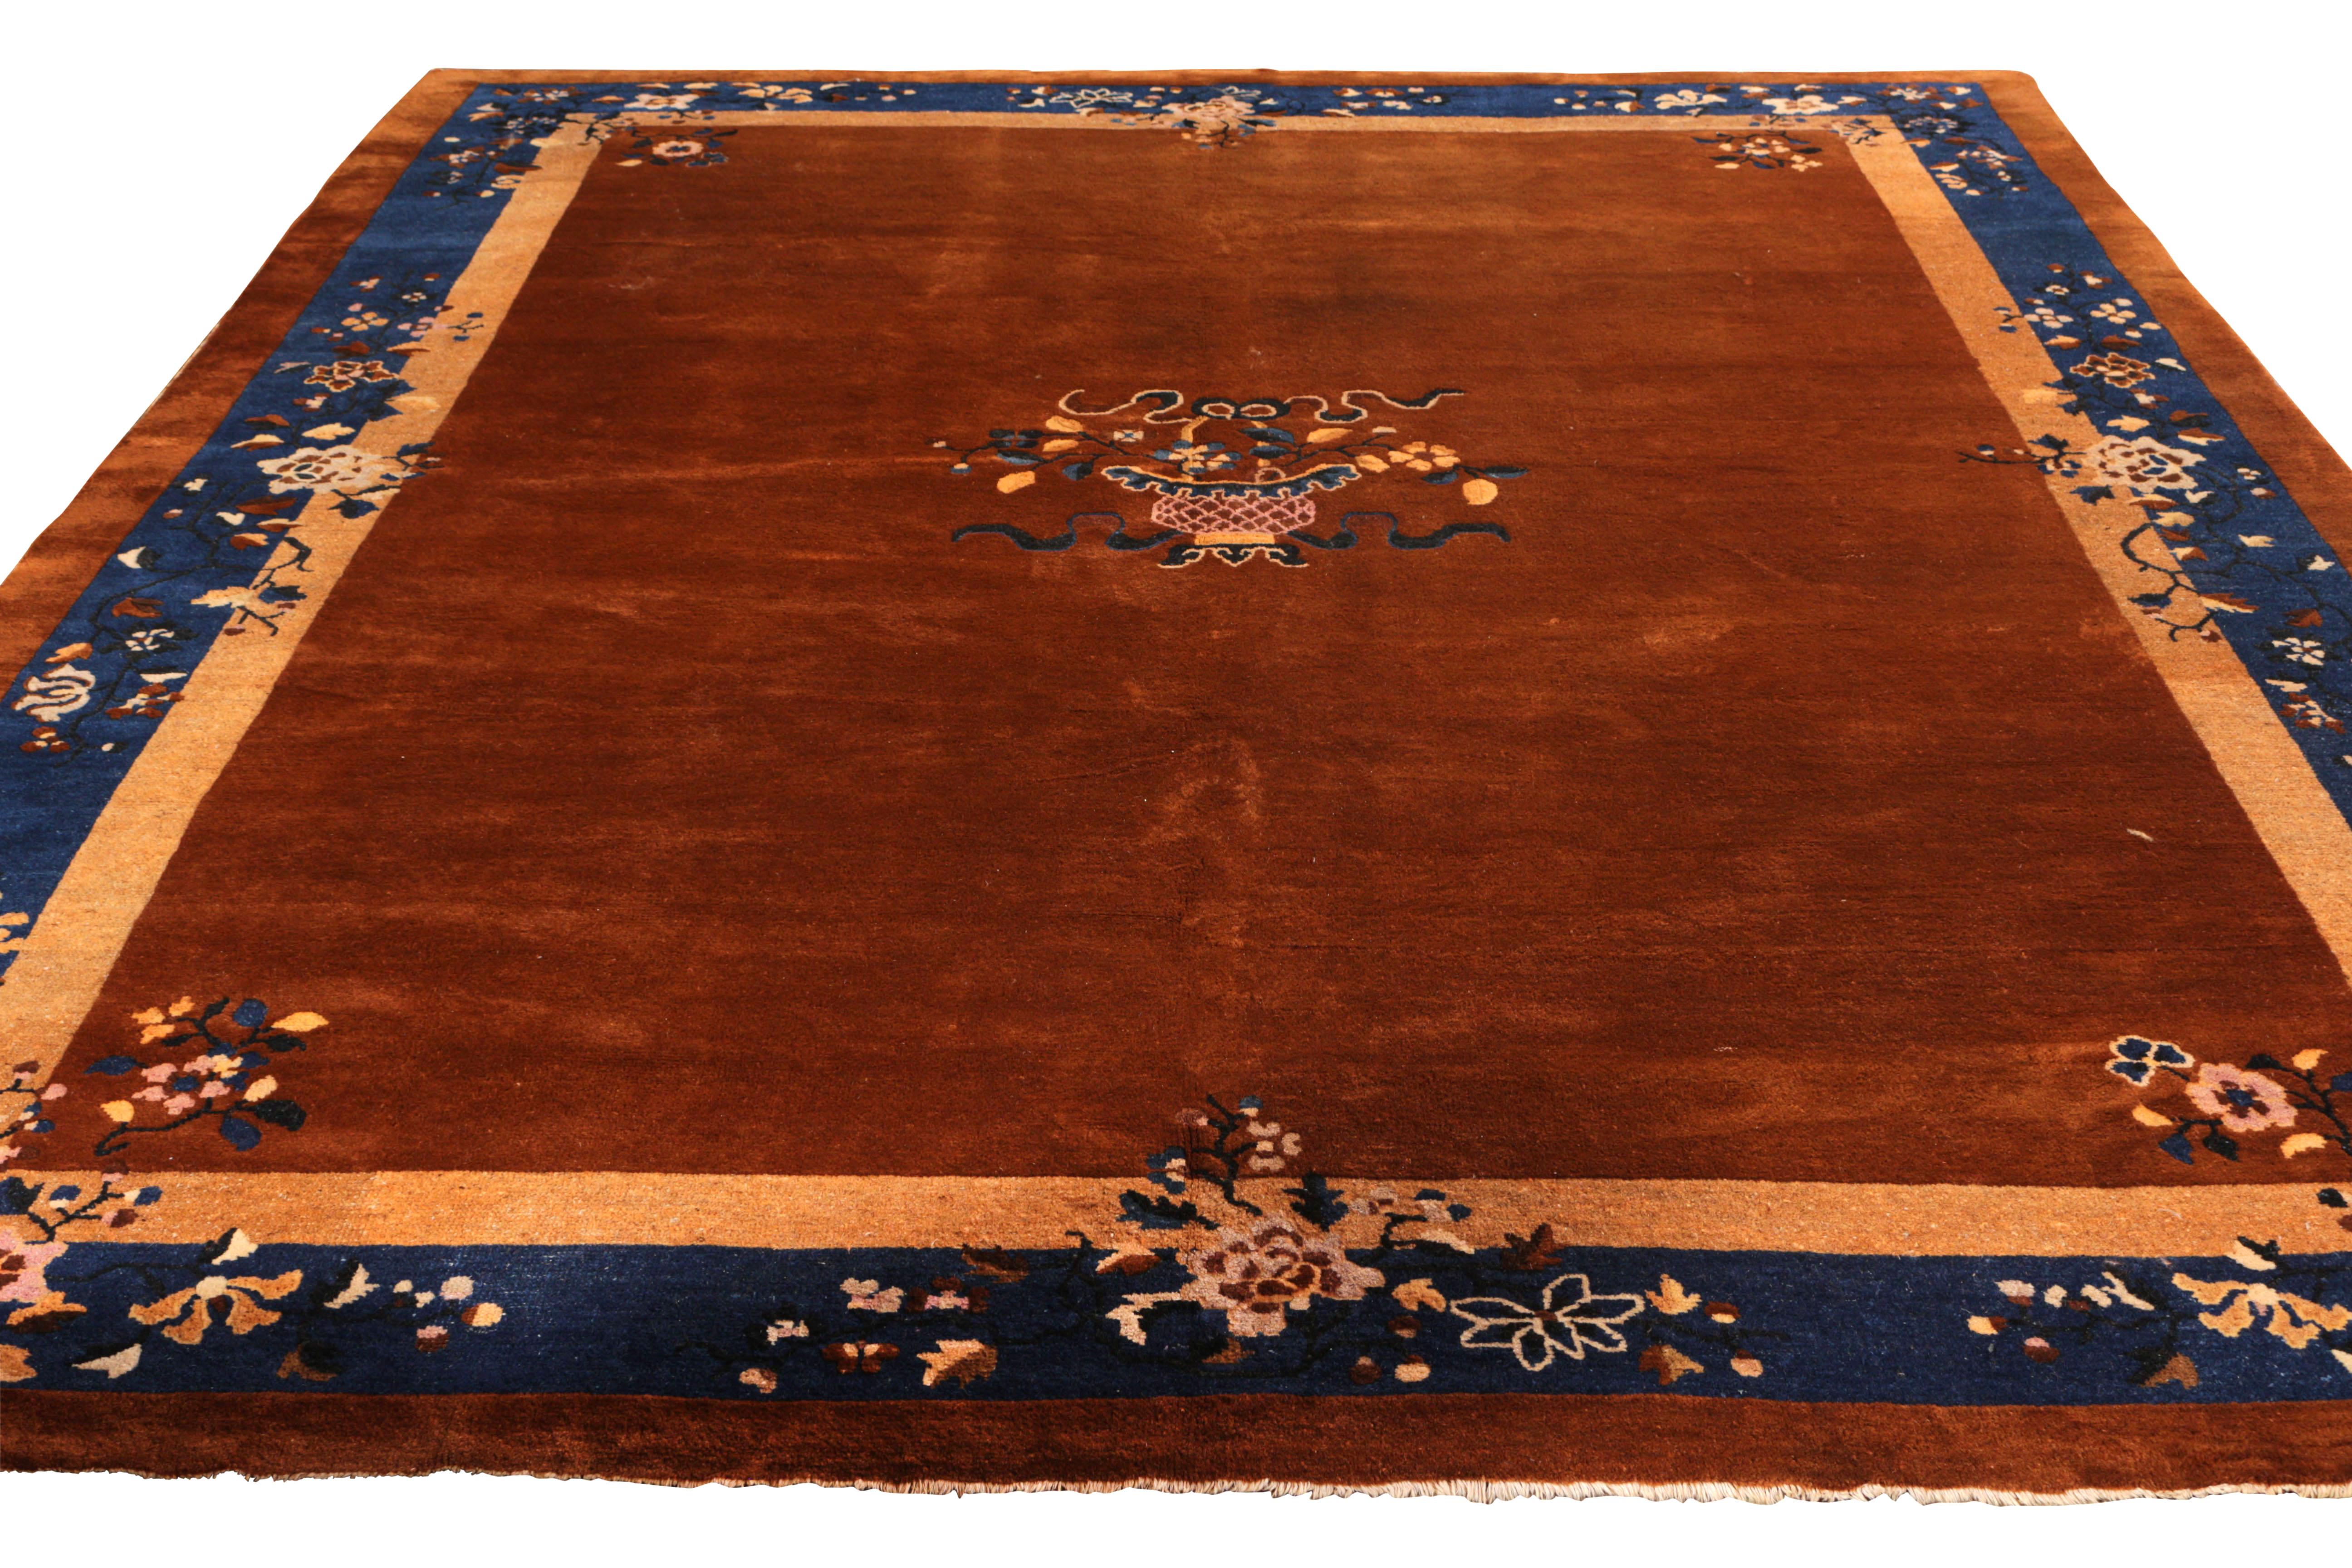 Hand knotted in wool originating from China circa 1920, this antique Art Deco rug enjoys a rich distinction among the Peking line of Rug & Kilim’s Antique & Vintage Rug collection—a marriage of open field and graceful stylistic floral motifs in a